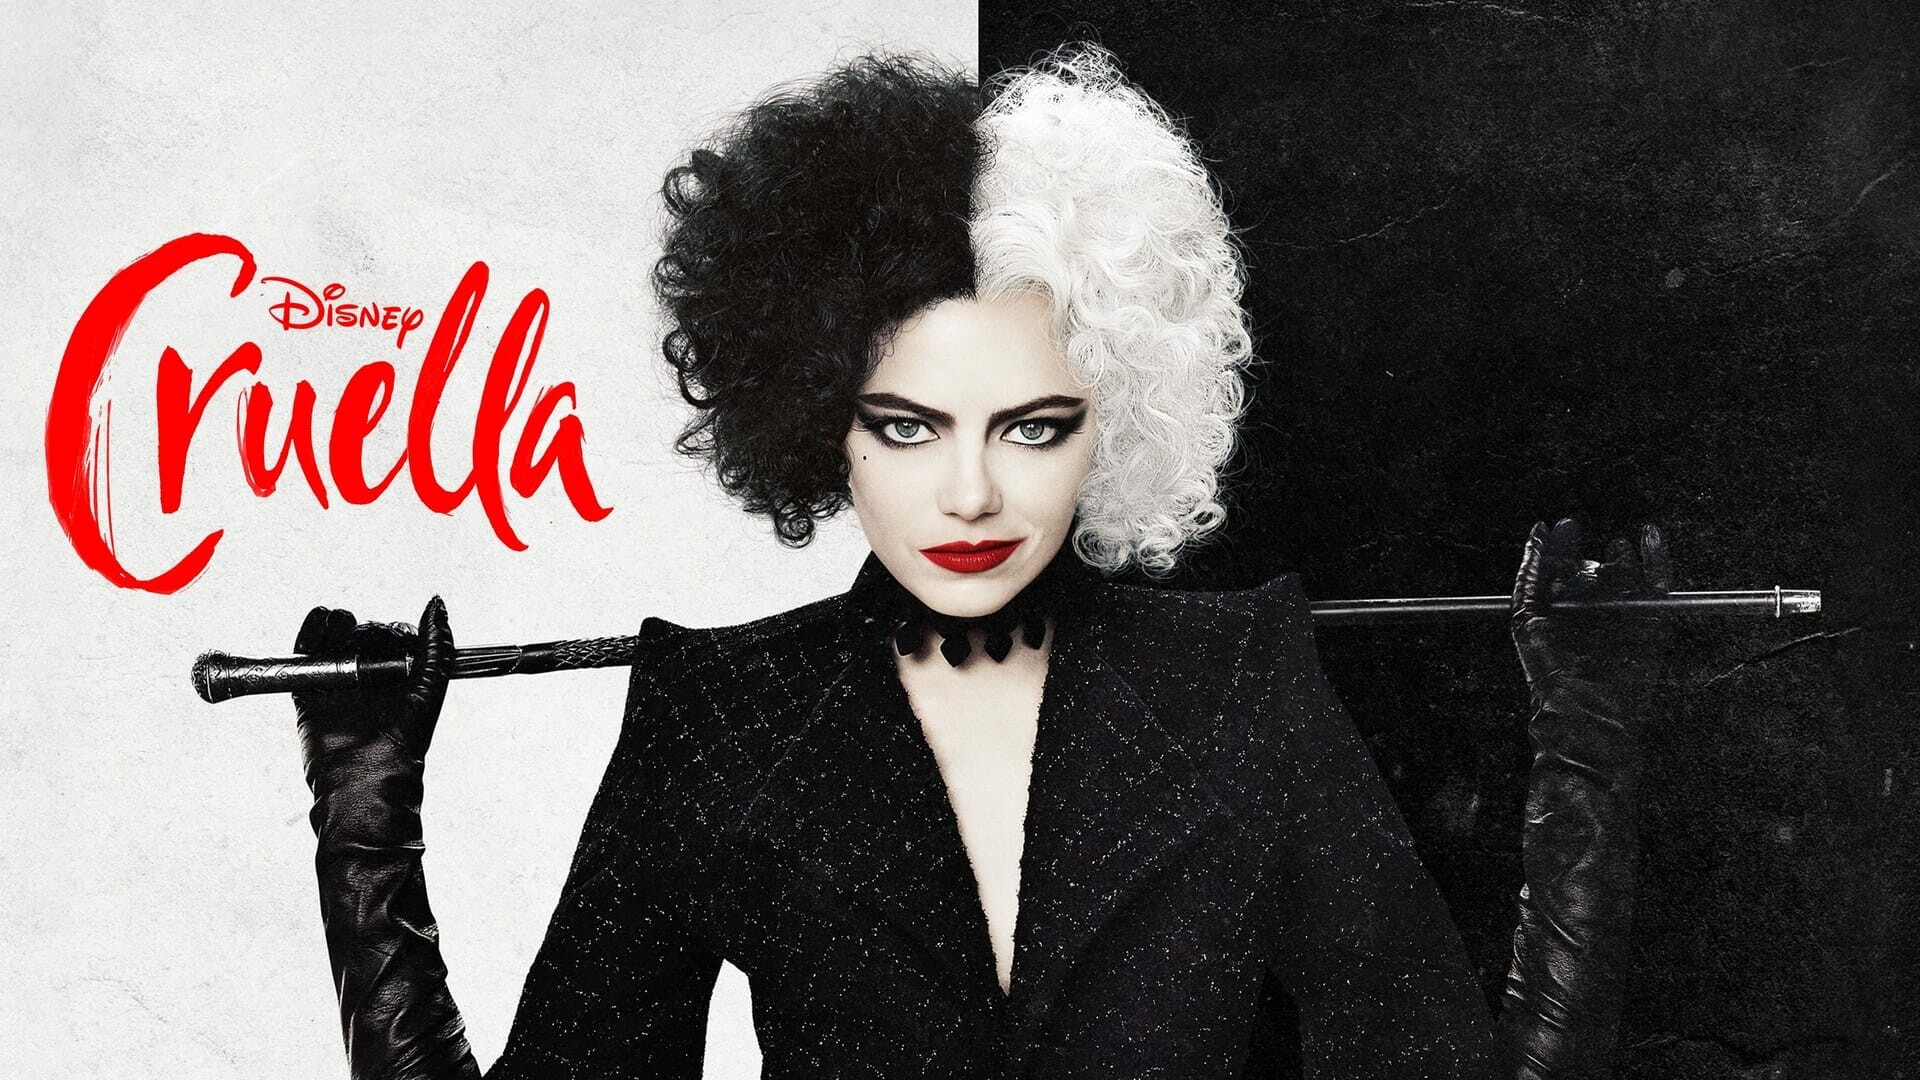 Cruella (2021): Distributed by Walt Disney Studios and Motion Pictures. 1920x1080 Full HD Wallpaper.